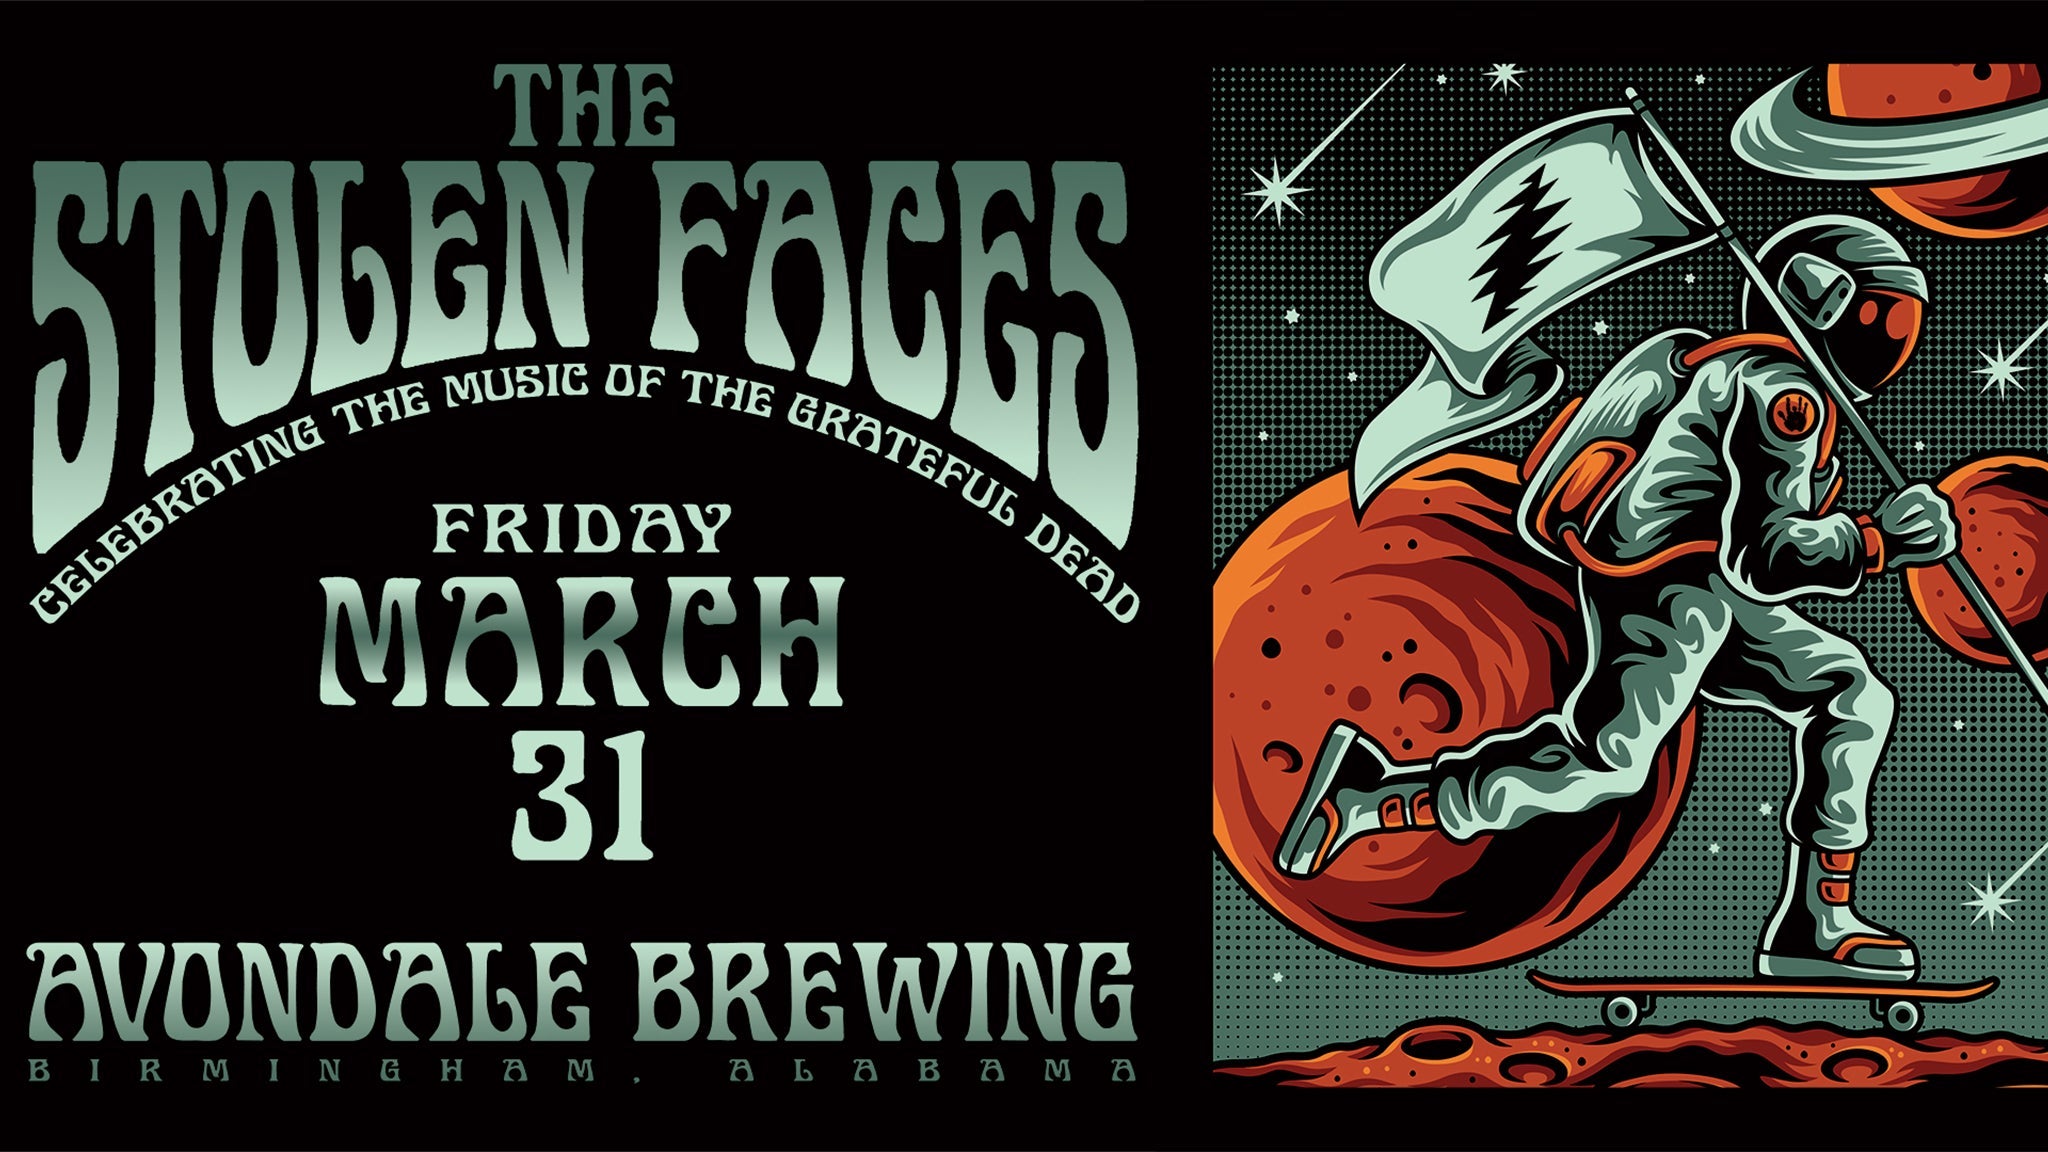 The Stolen Faces at Avondale Brewing Co.